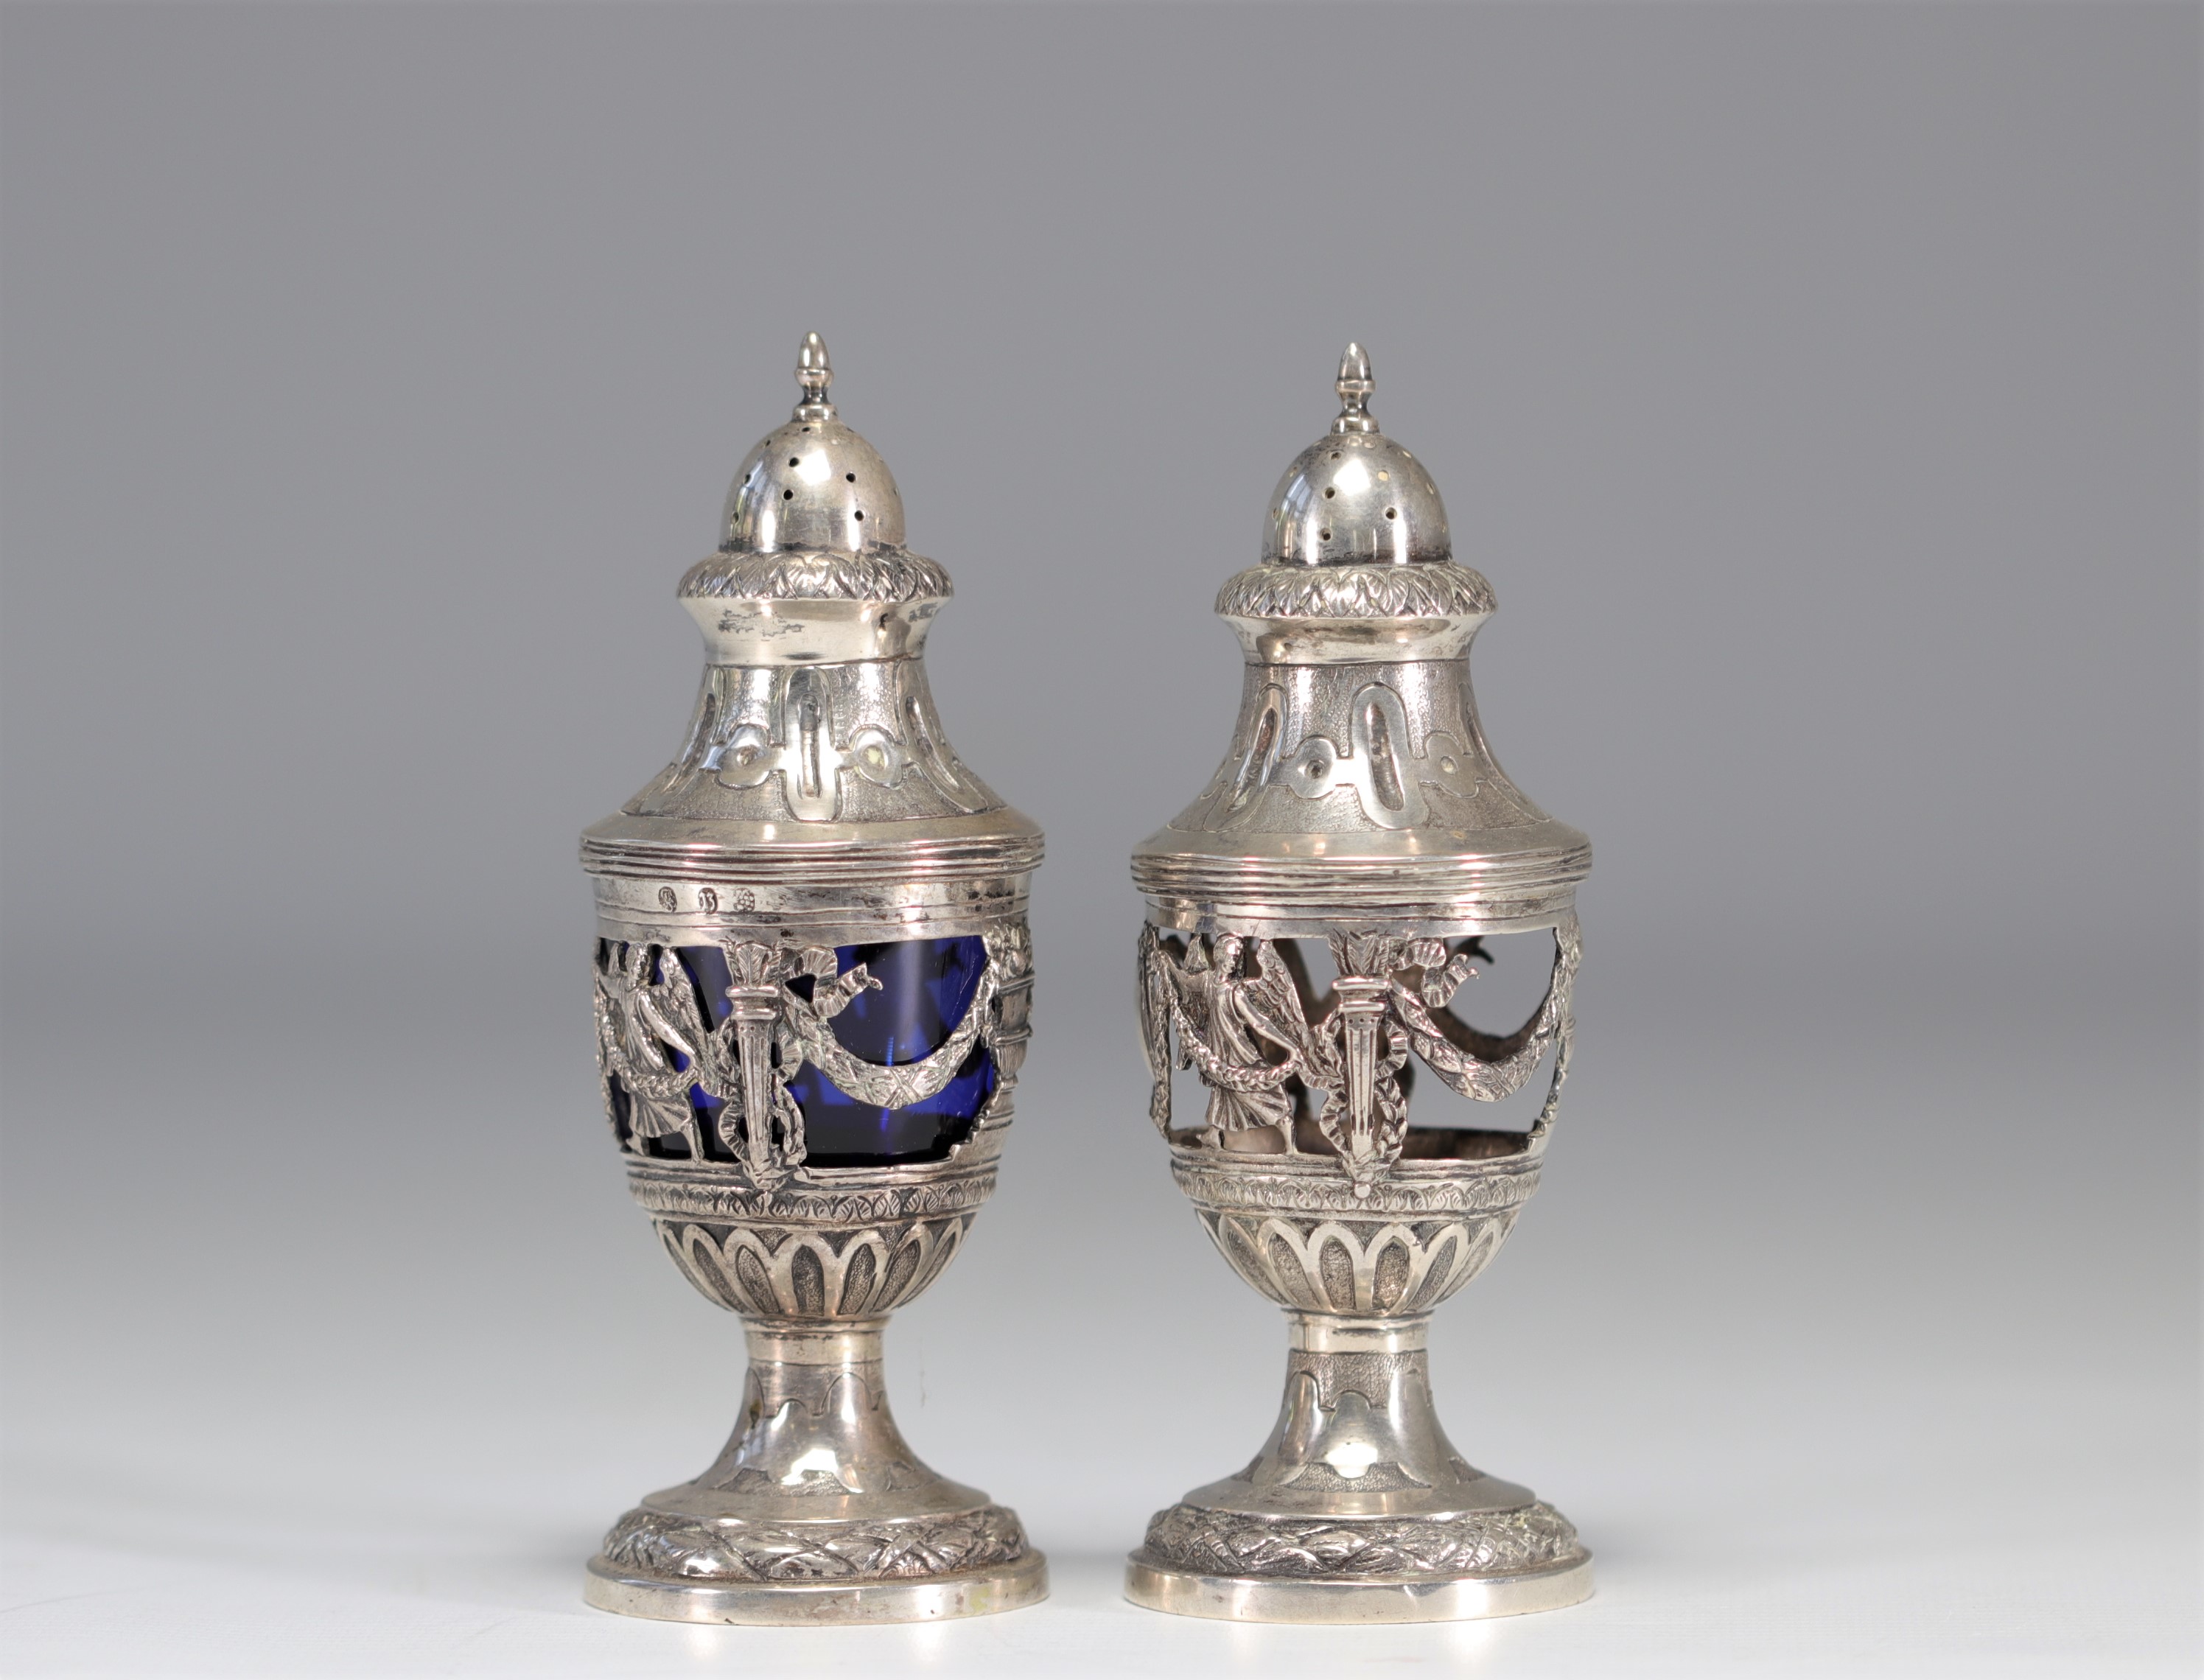 Solid silver sprinklers with Reims hallmarks from the 18th century - Image 2 of 5